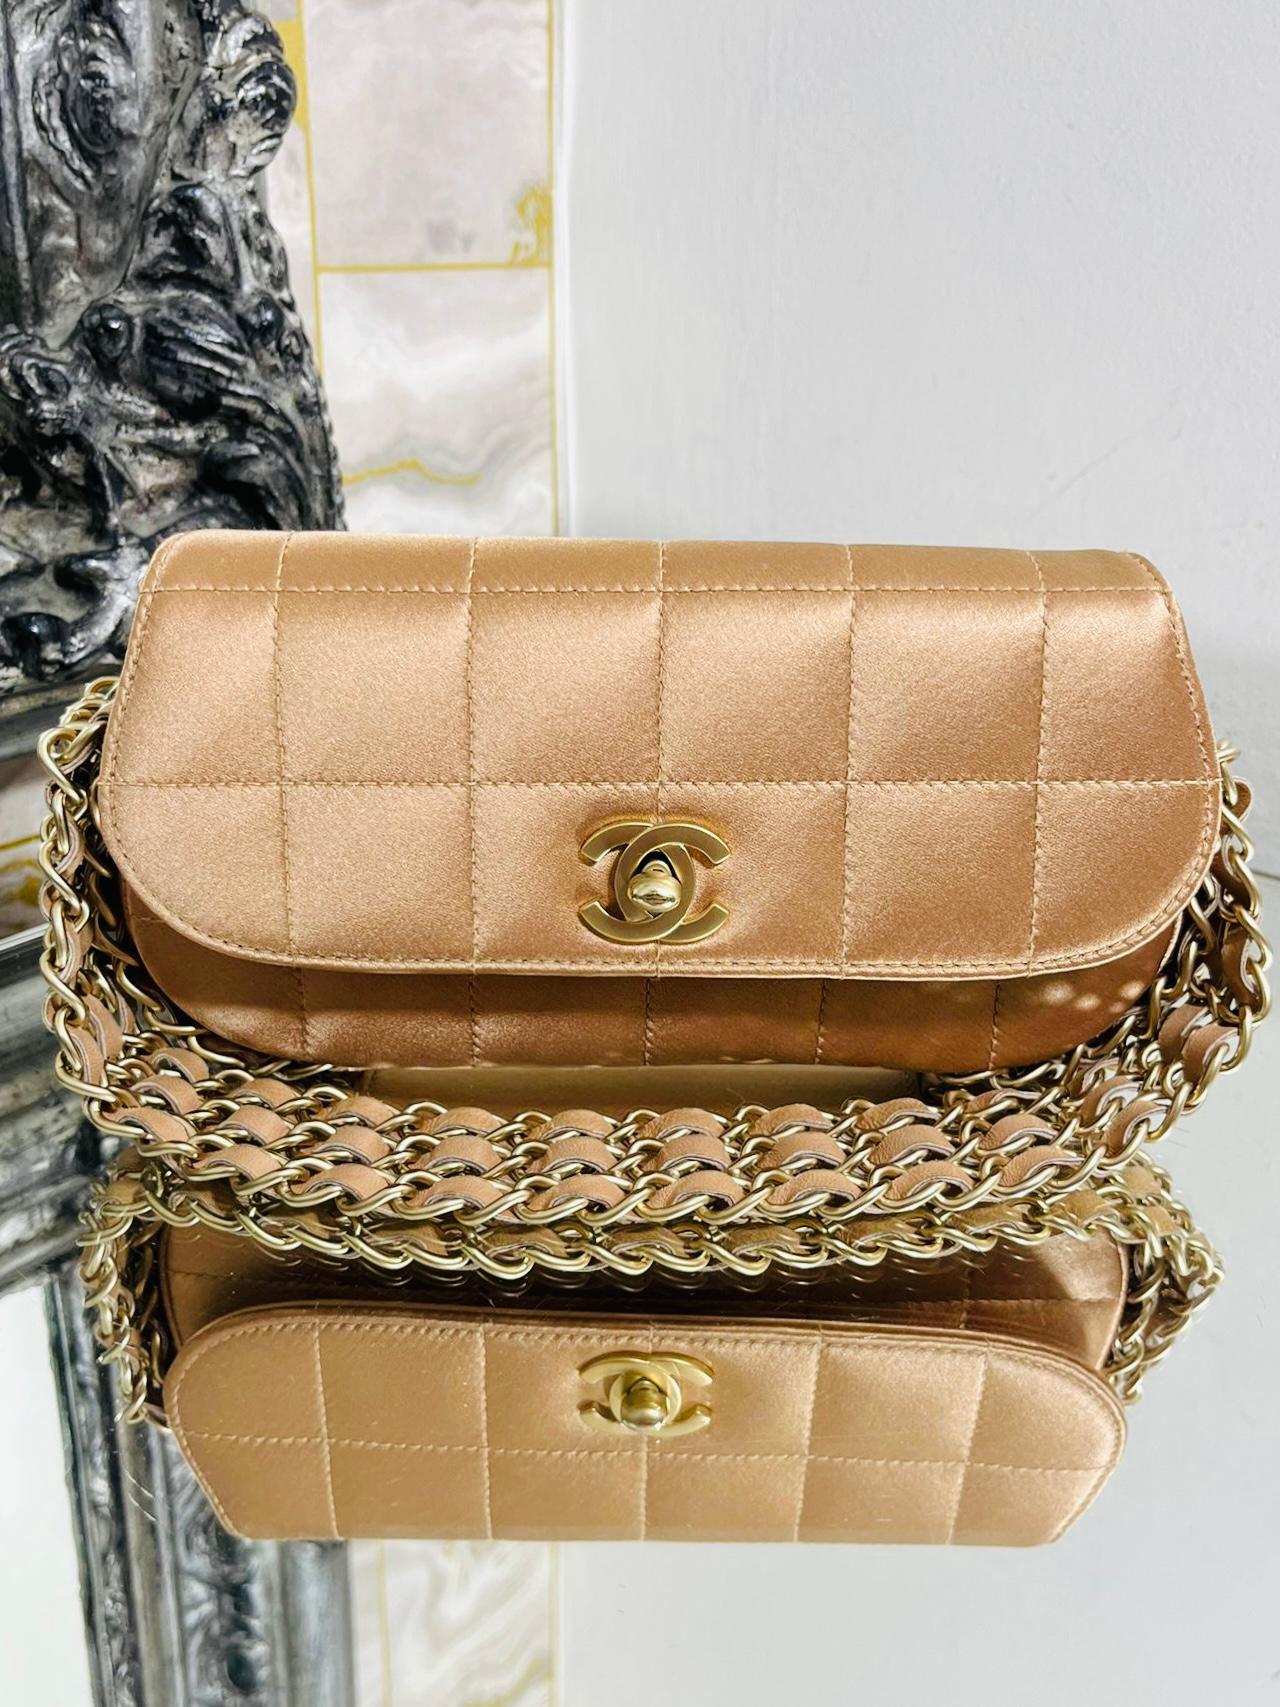 Chanel Chocolate Bar Five Chain Flap Bag

Peach tine satin bag with square stitch detailing and 'CC' twist lock closure.

Five rows of leather and chain trim and shoulder strap. From 2004/05.

Size - Height 10cm, Width 21cm, Depth 3.5cm

Condition -